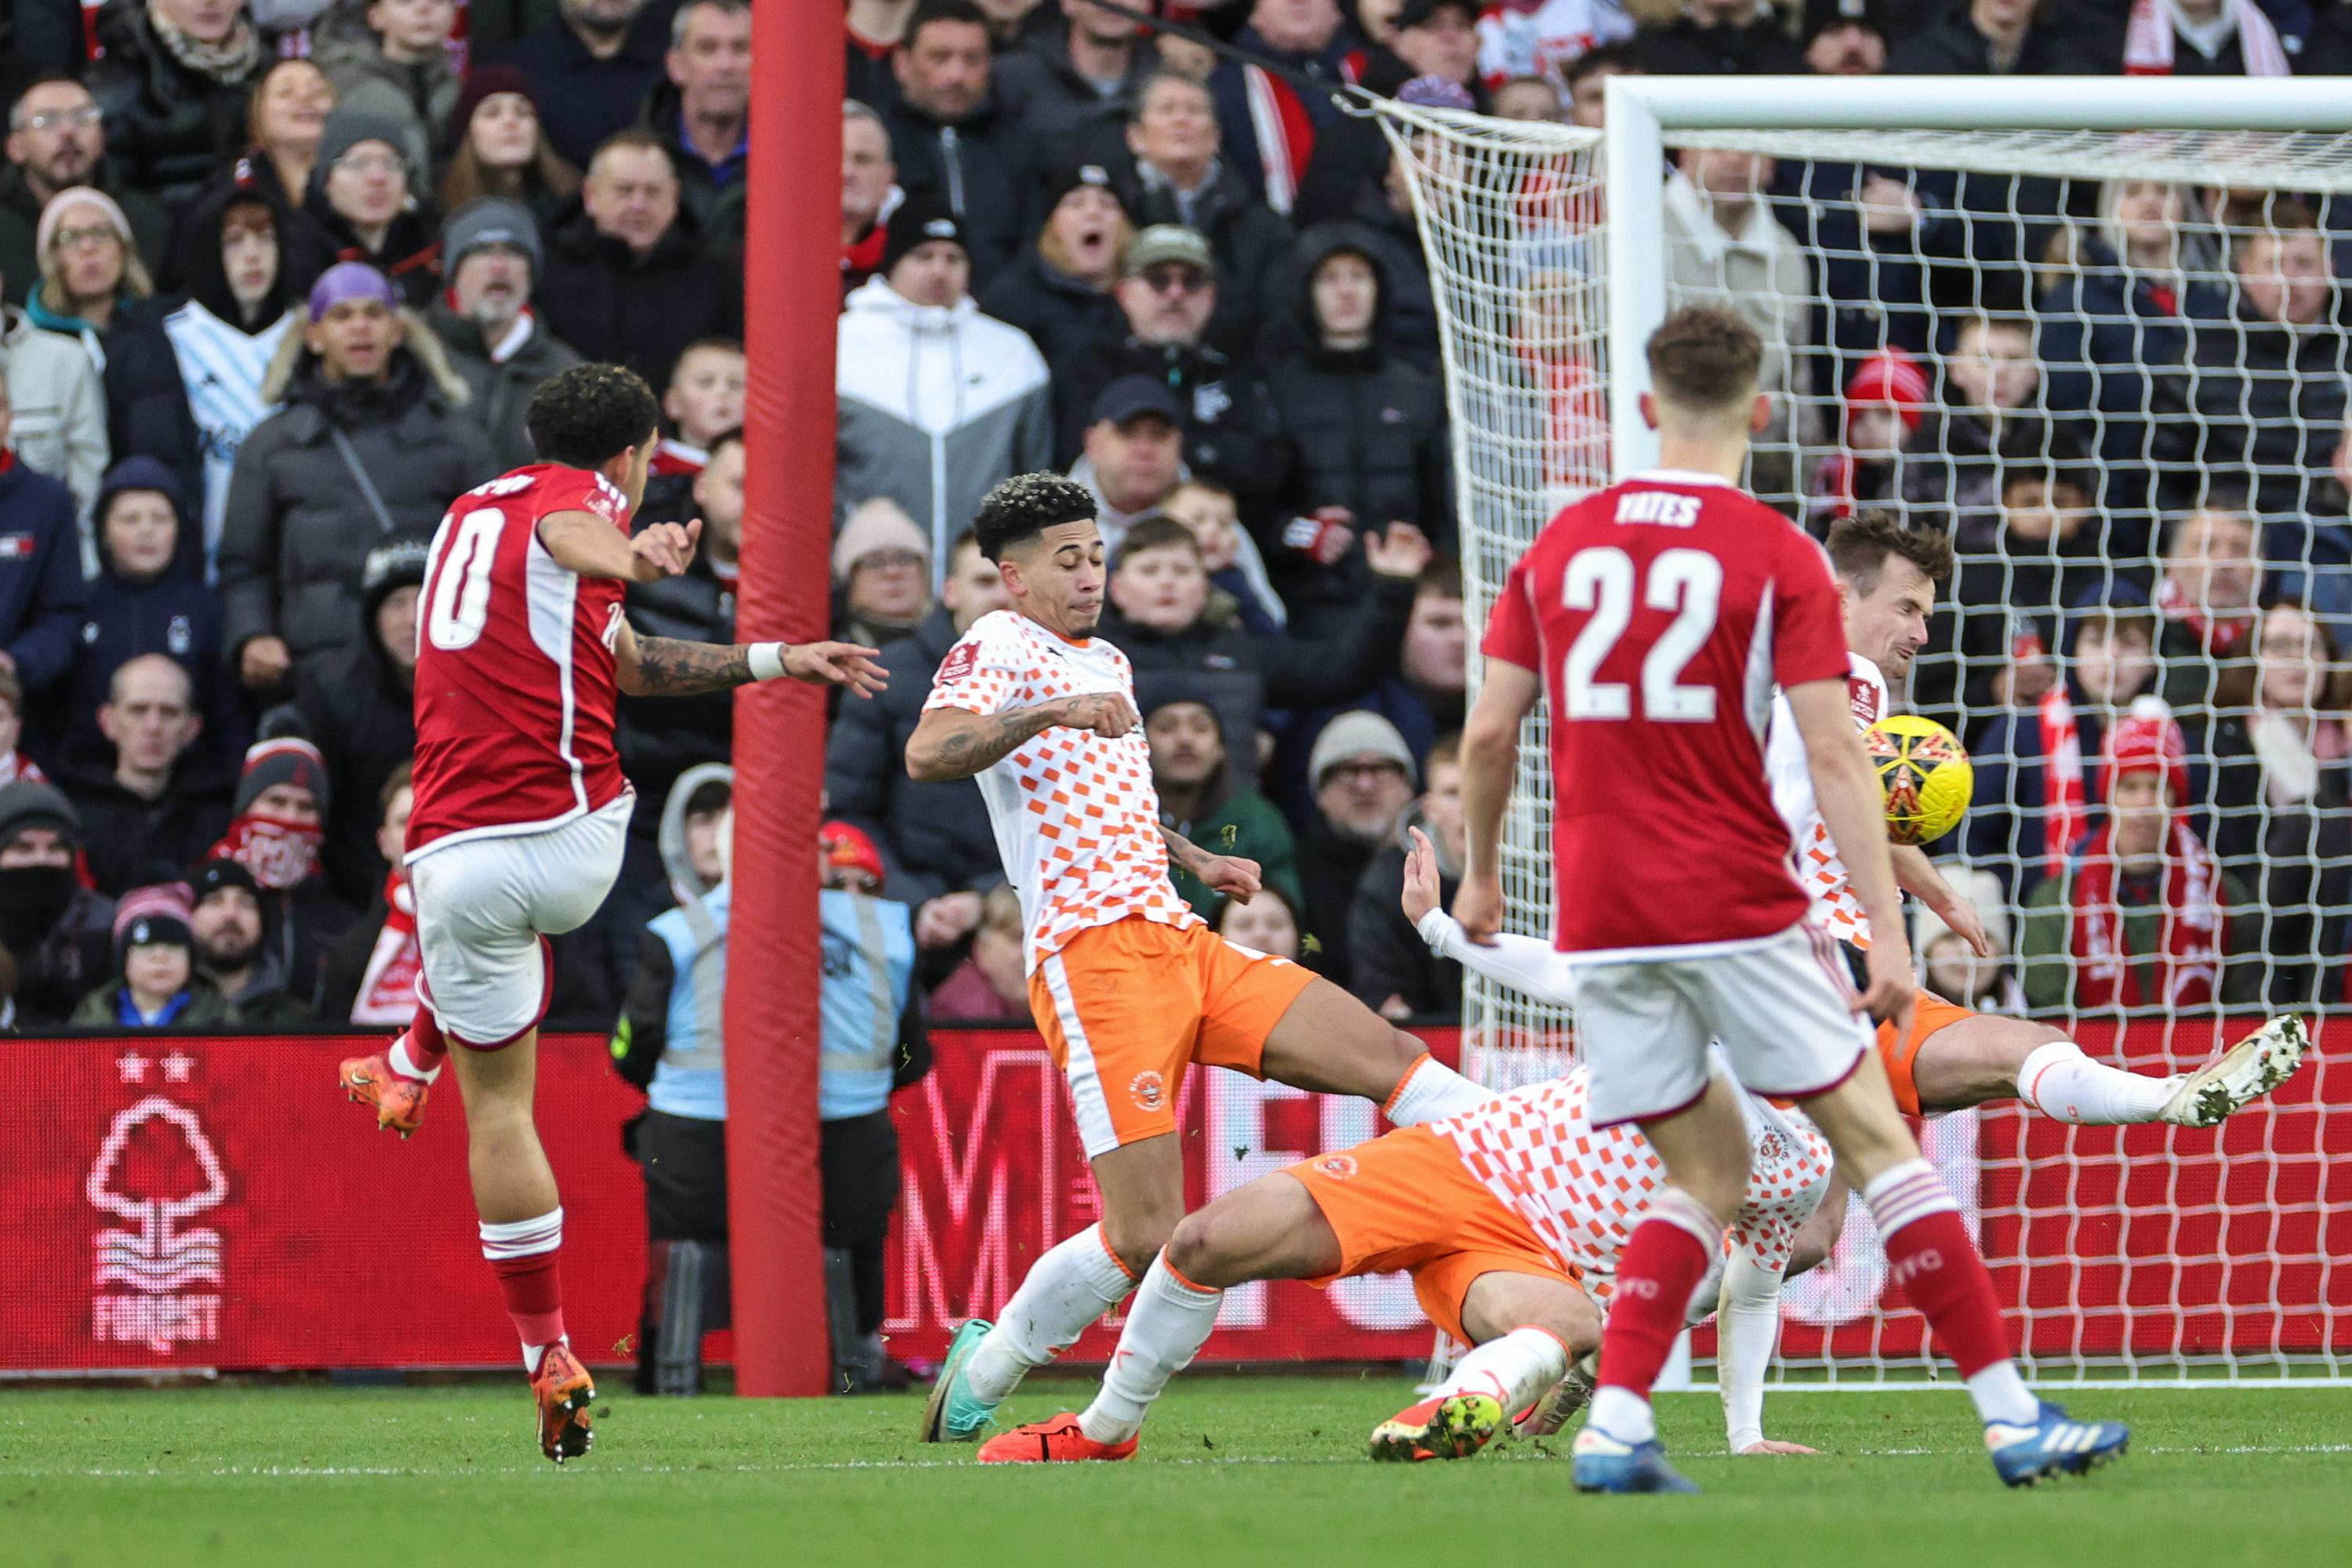 Football: in video, the magnificent goals scored by Bamford and Gibbs-White in the FA Cup